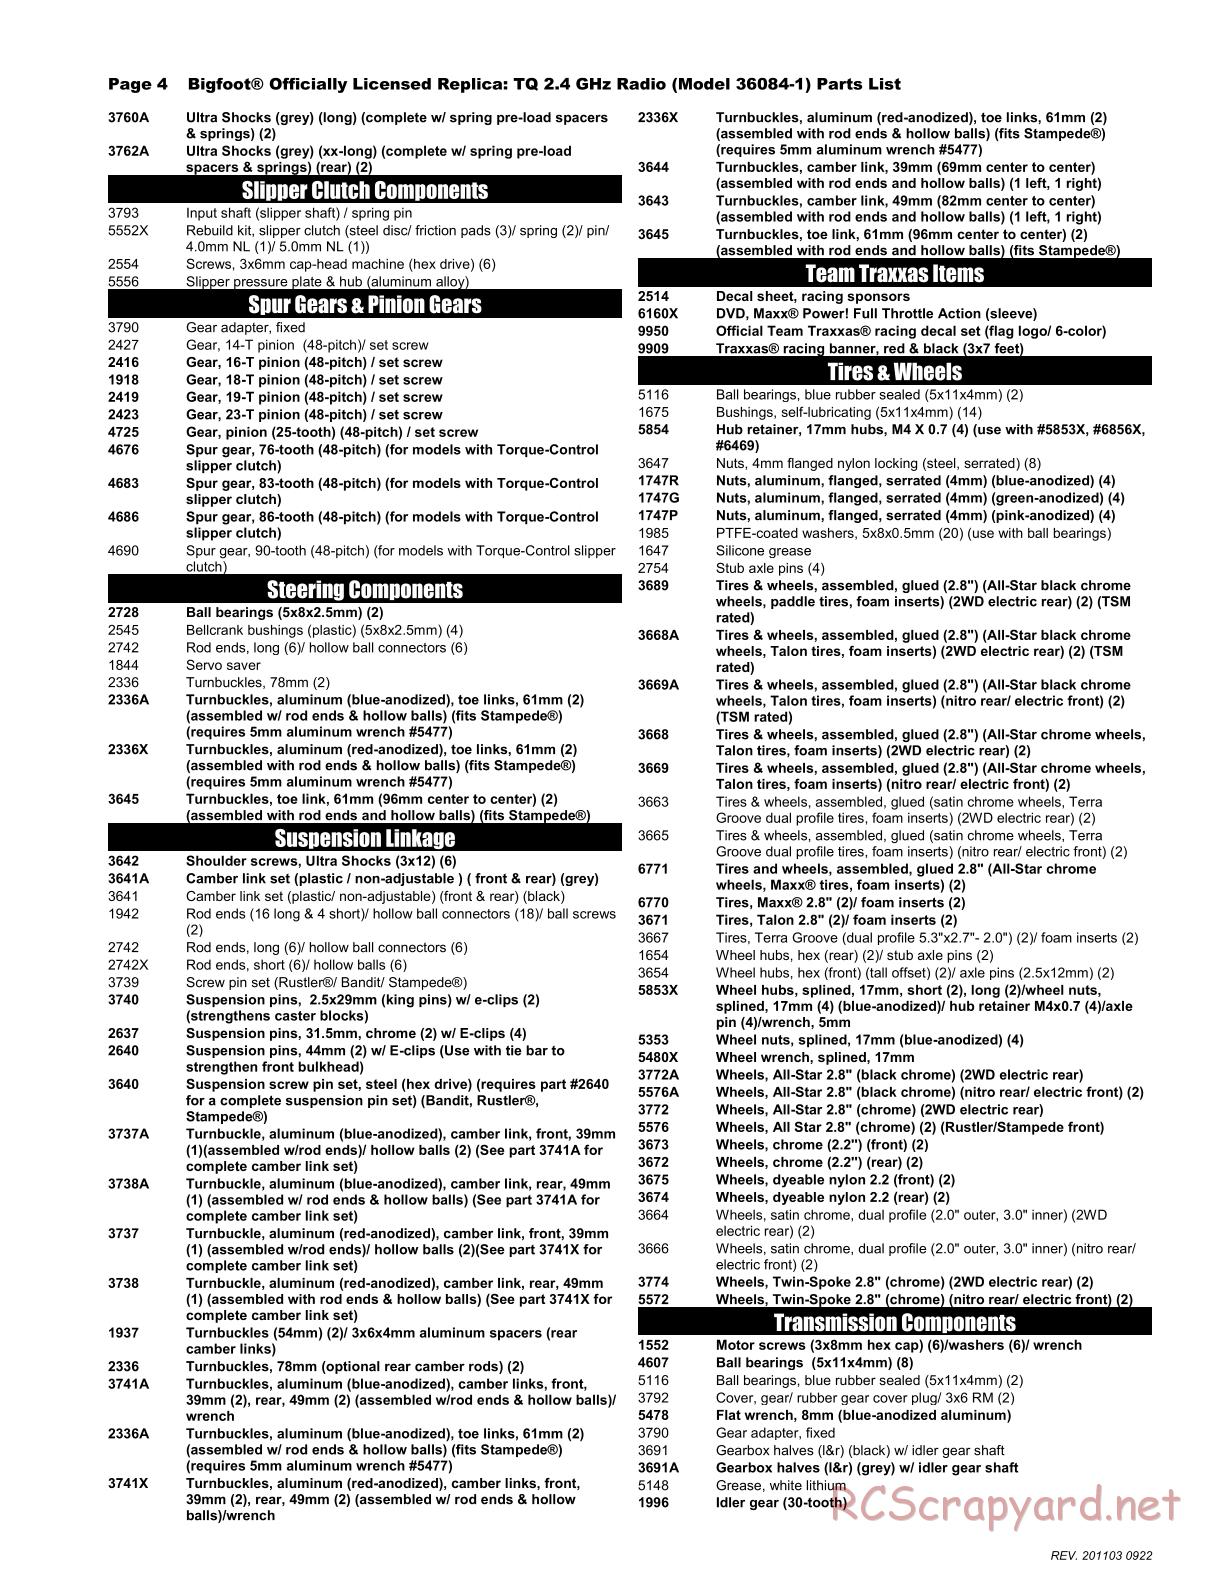 Traxxas - Bigfoot - Parts List - Page 4